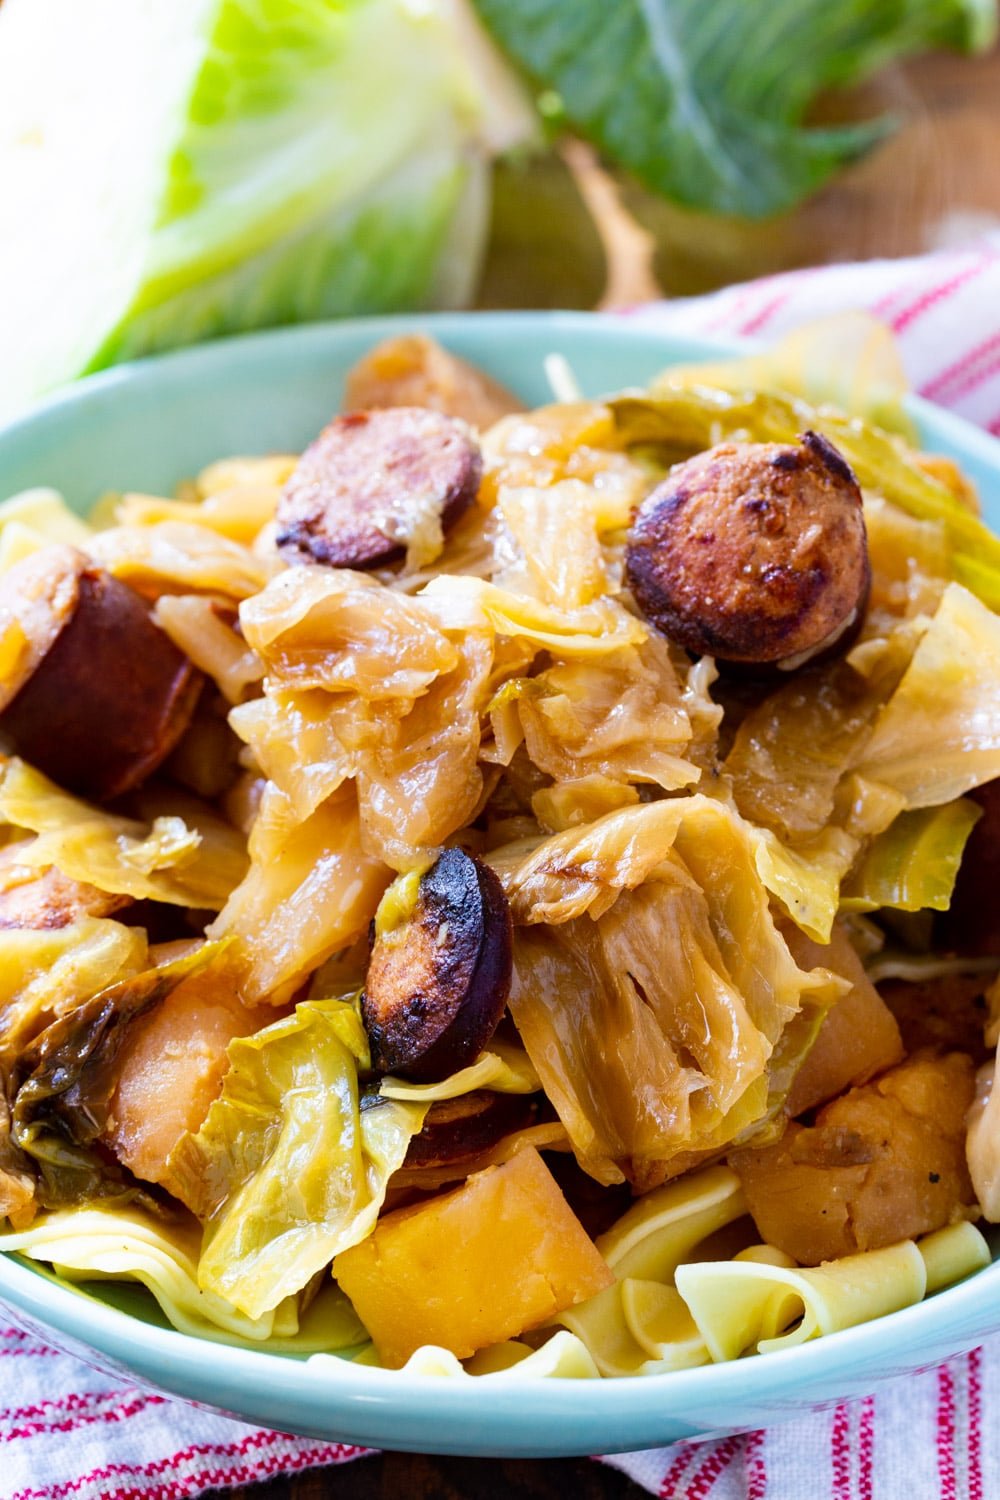 Cabbage and Kielbasa over noodles in bowl.